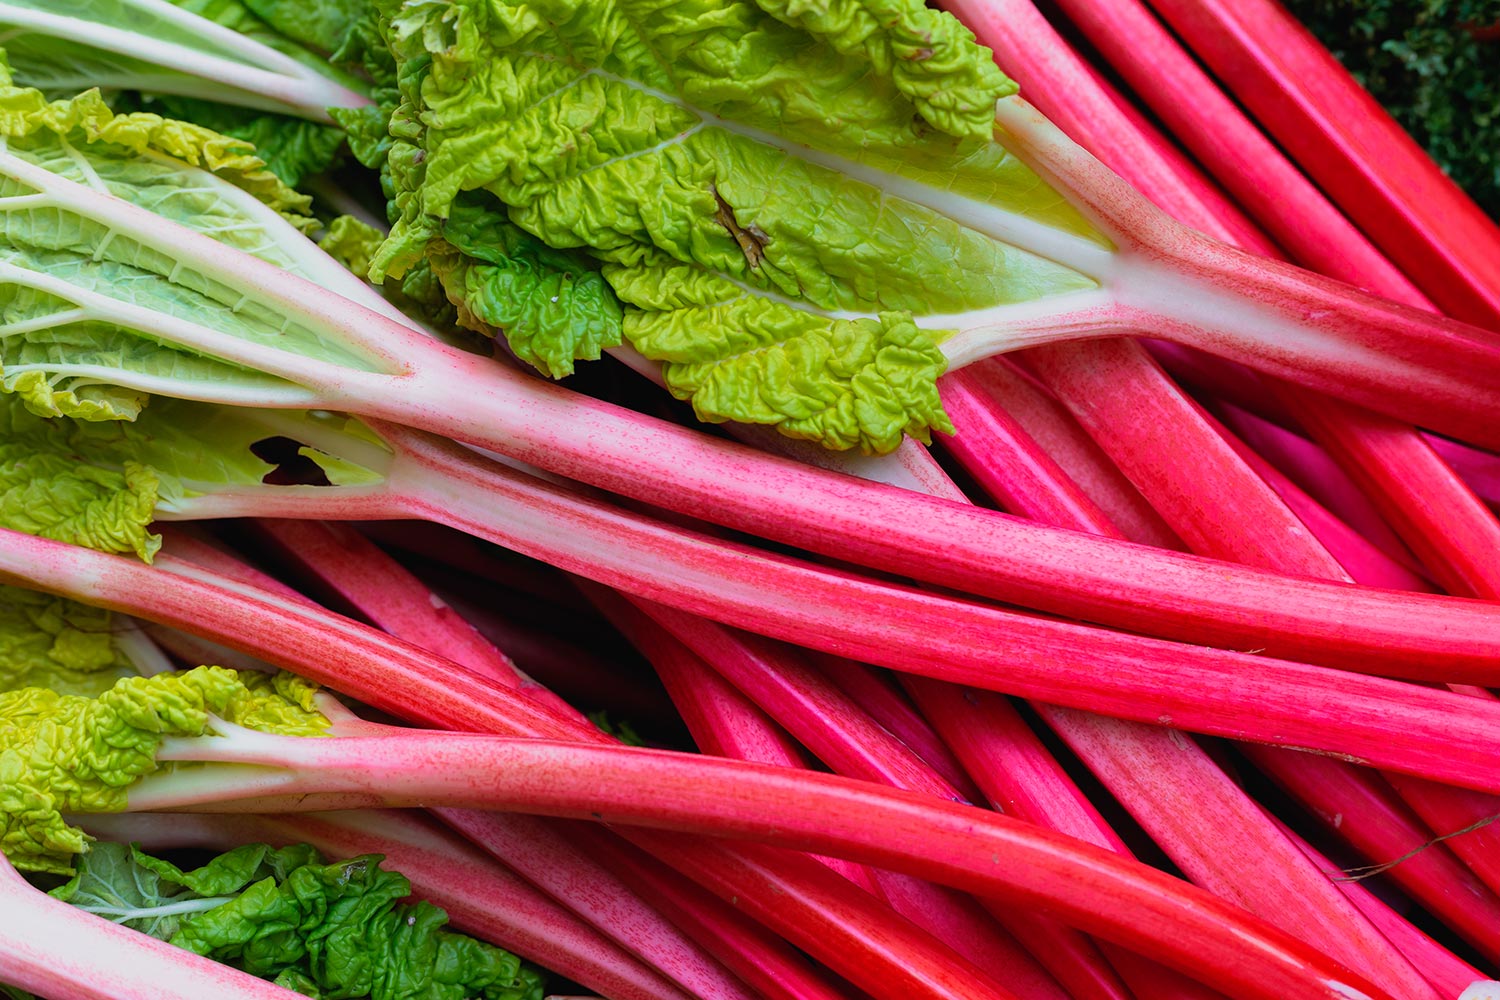 Sticks of fresh rhubarb for sale at a fruit and vegetable market.